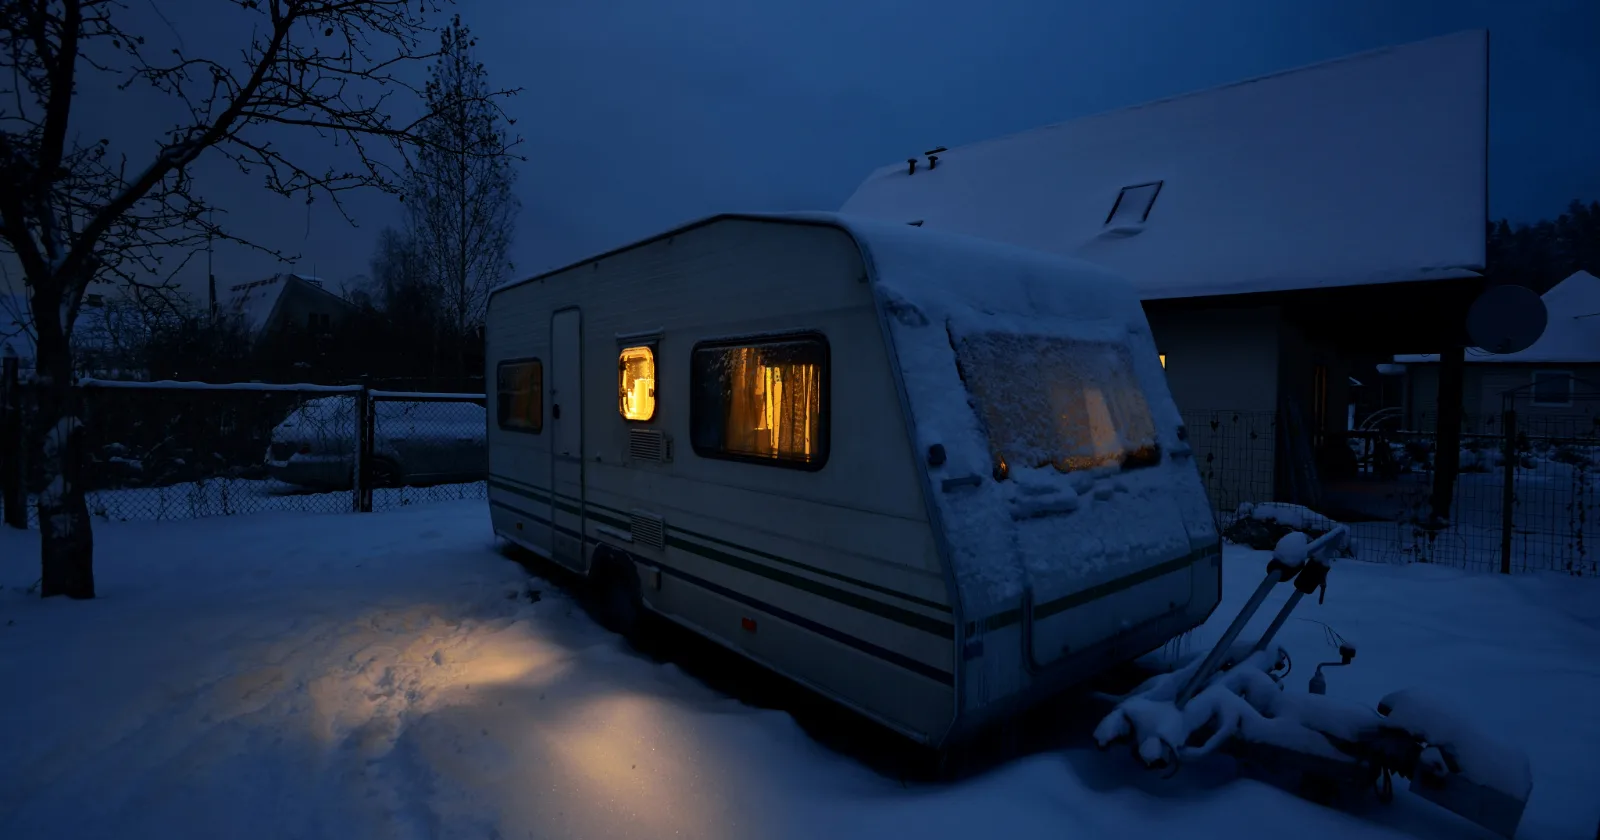 Snow covered travel trailer with lights on inside parked next to house and not being used till camping season